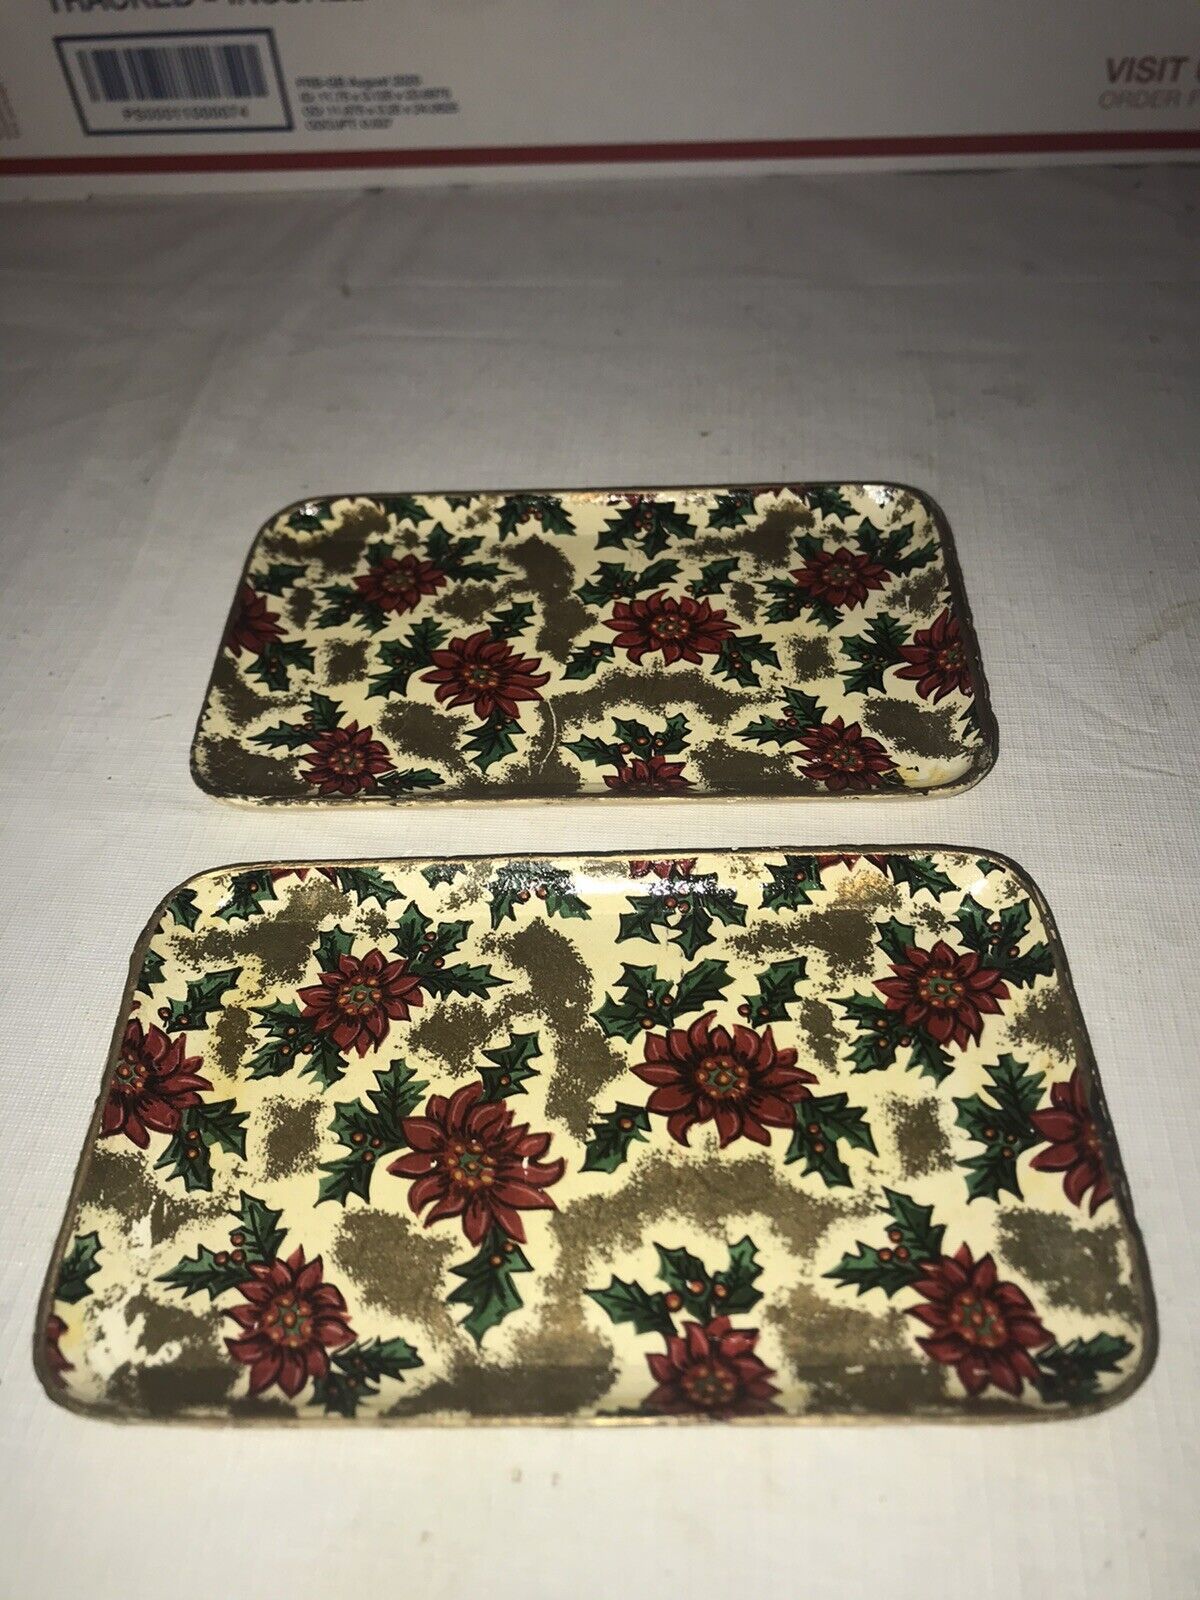 2 VINTAGE HIGHMOUNT QUALITY CHRISTMAS SERVING FOOD TRAYS ALCOHOL PROOF JAPAN  M2